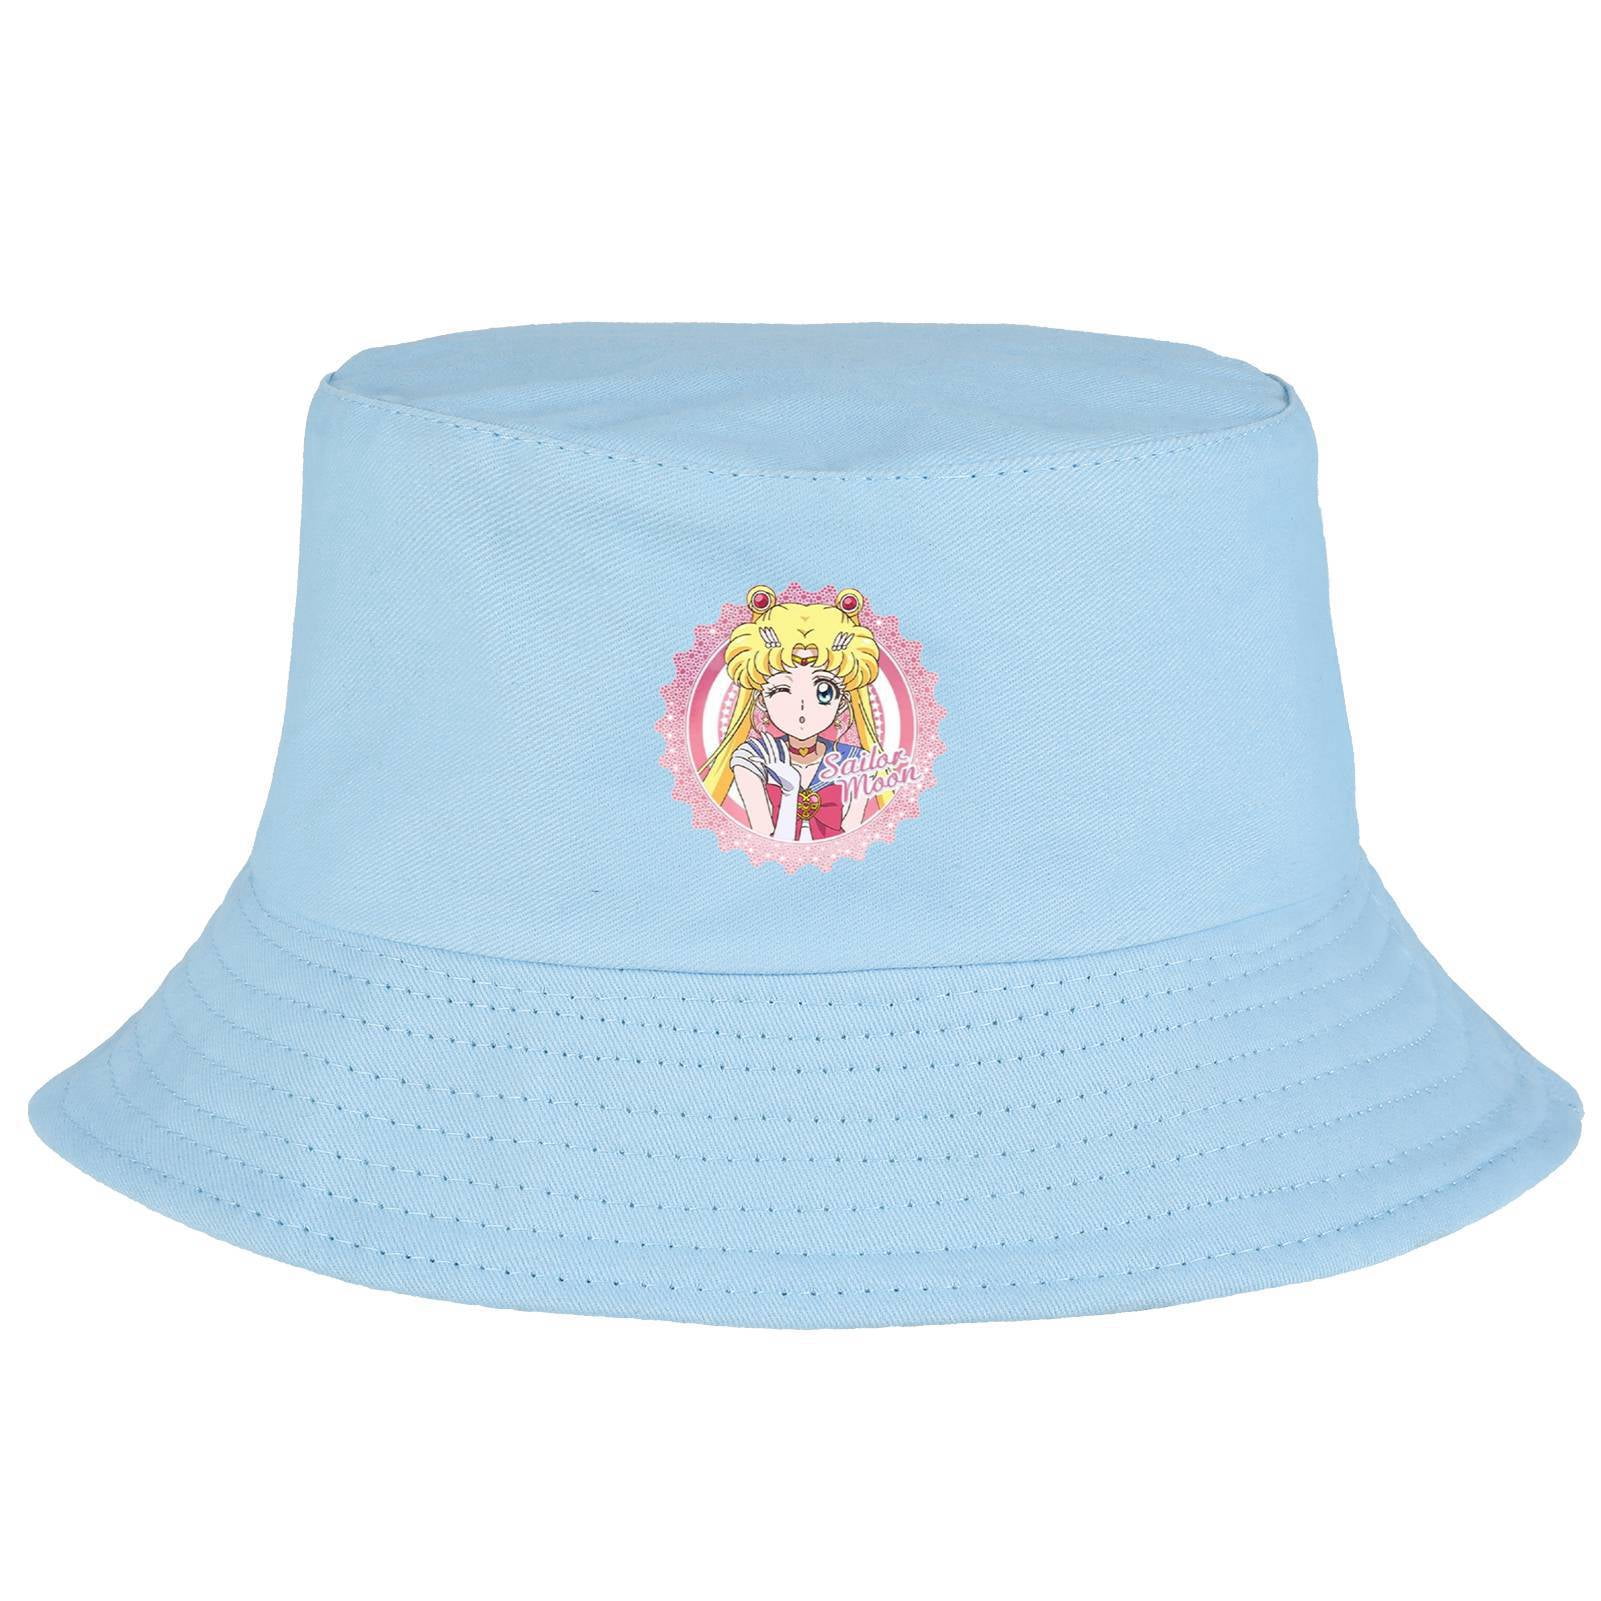 Lazy Funny Cat Summer Unisex Fishing Sun Top Bucket Hats for Kid Teens Women and Men with Packable Fisherman Cap for Outdoor Baseball Sport Picnic